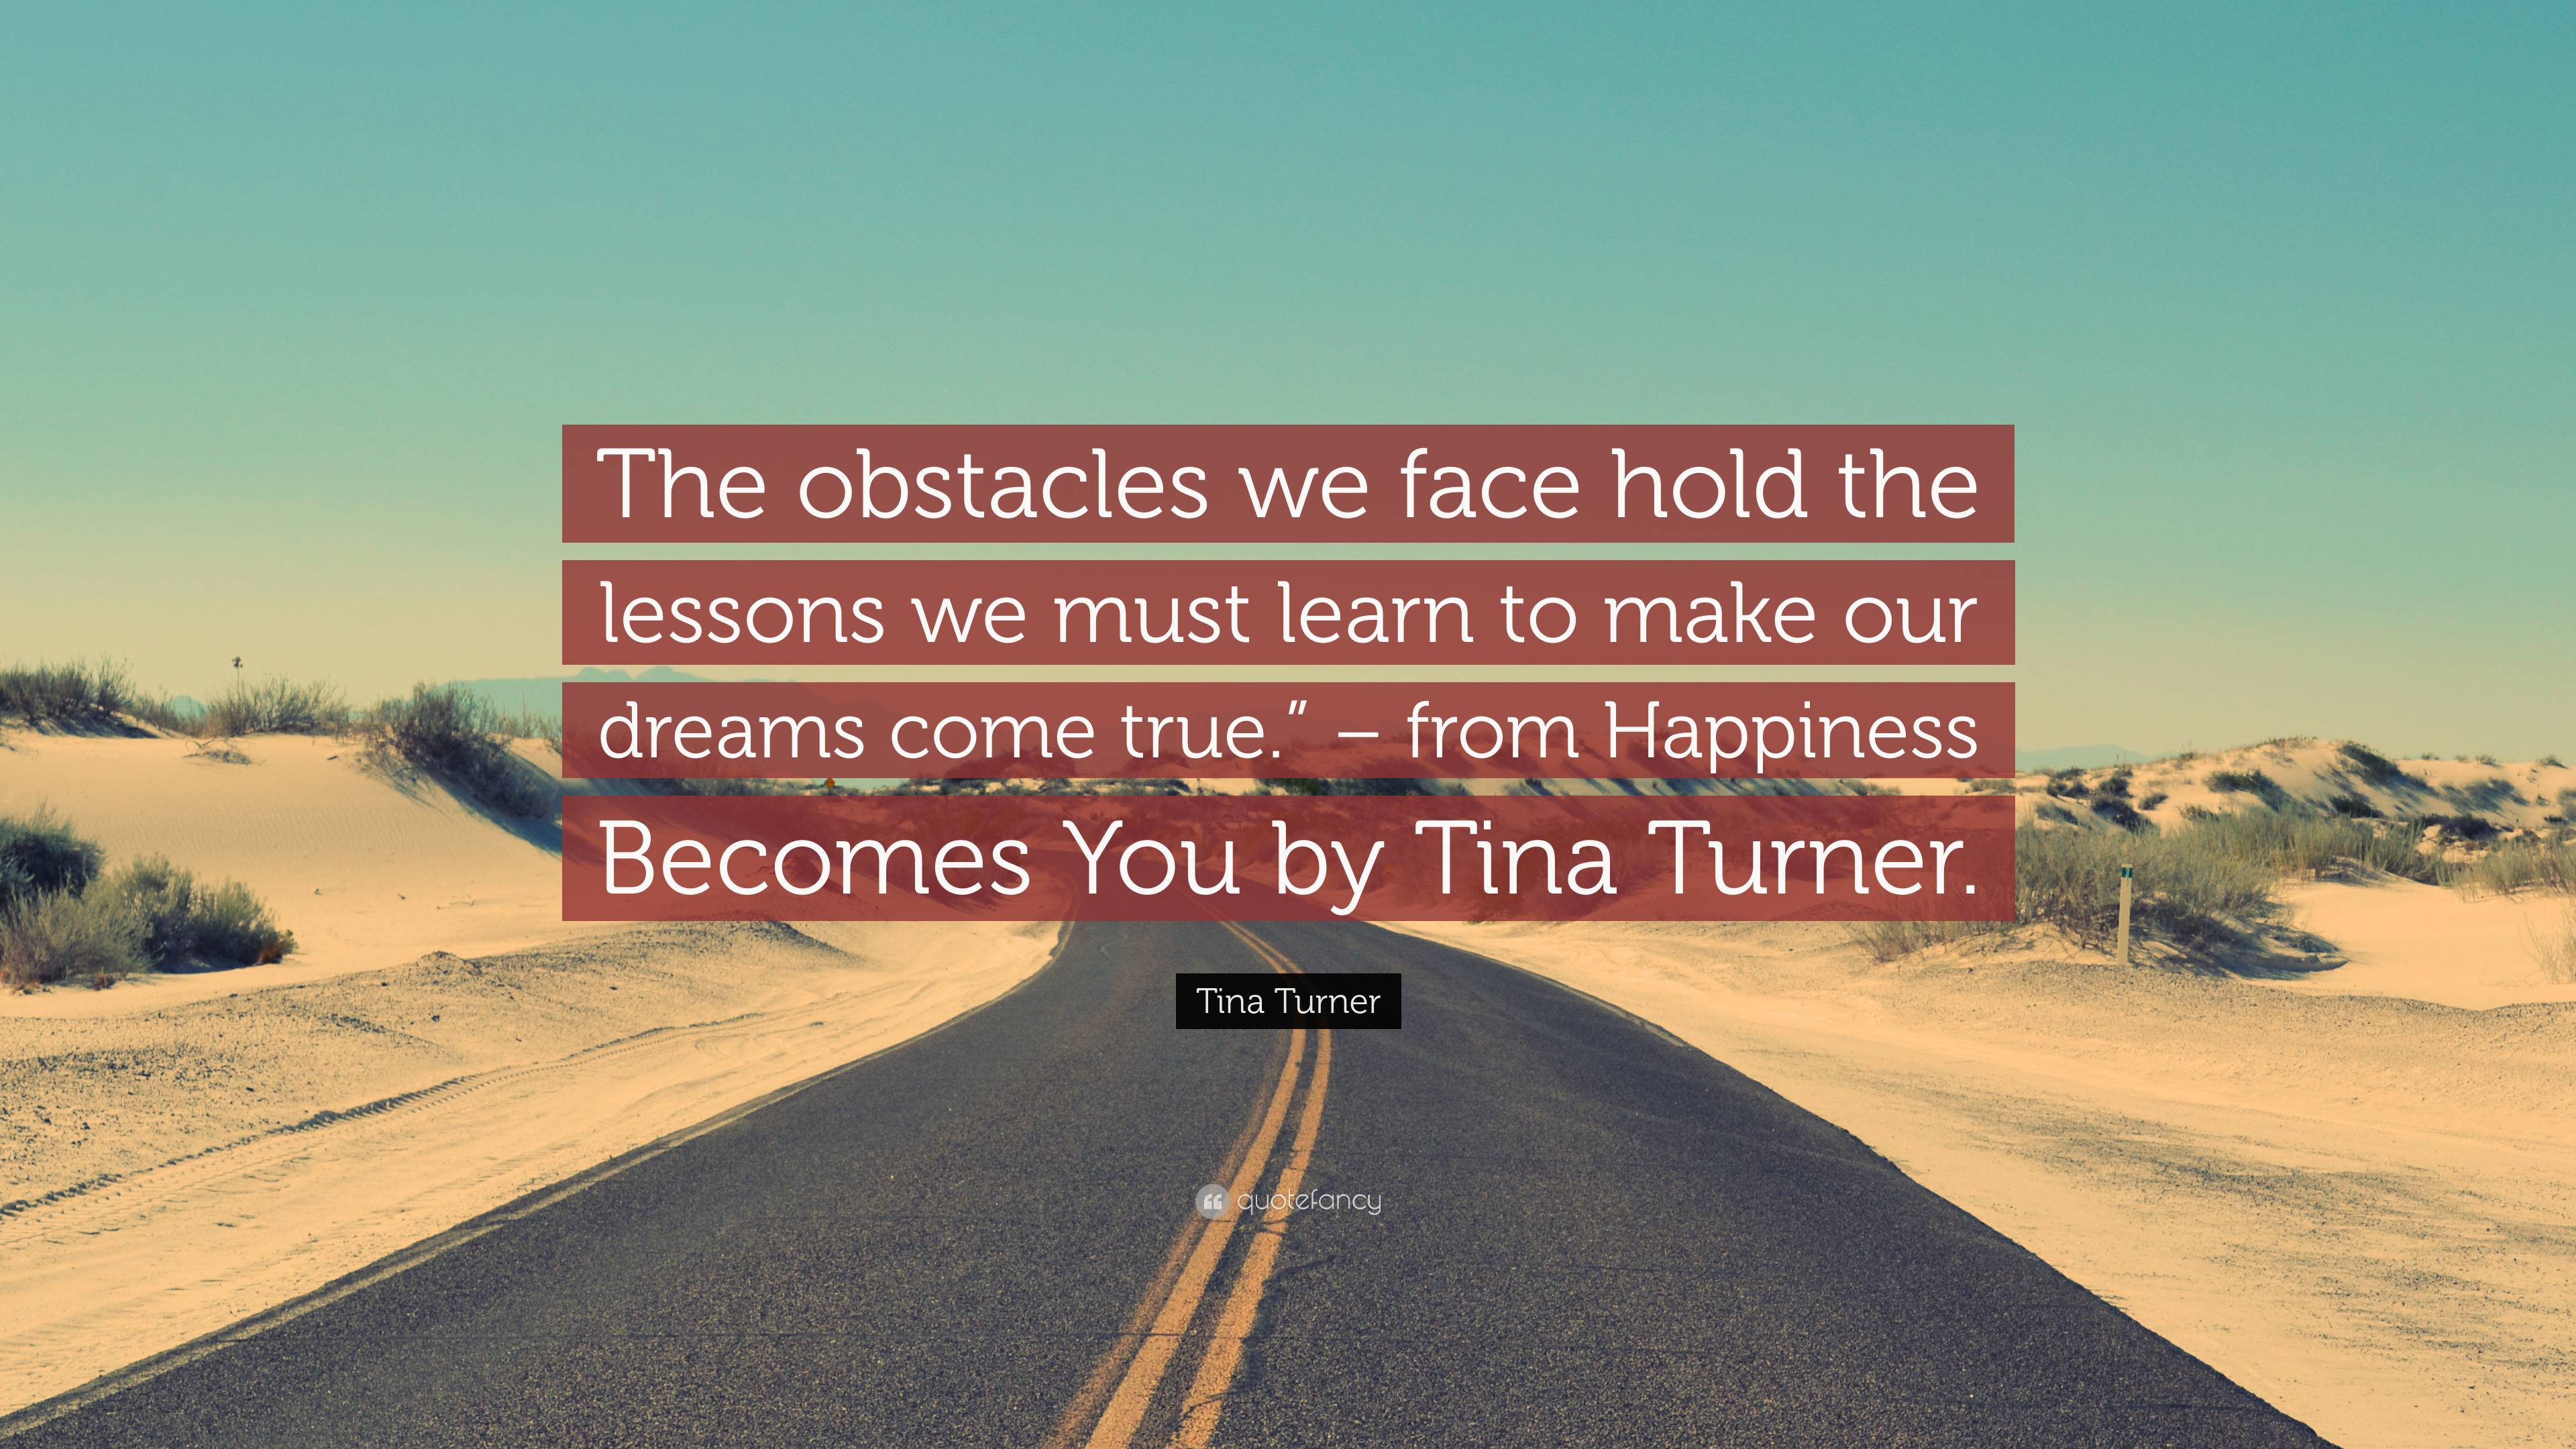 Tina Turner's Journey to Happiness and Inspiring Others